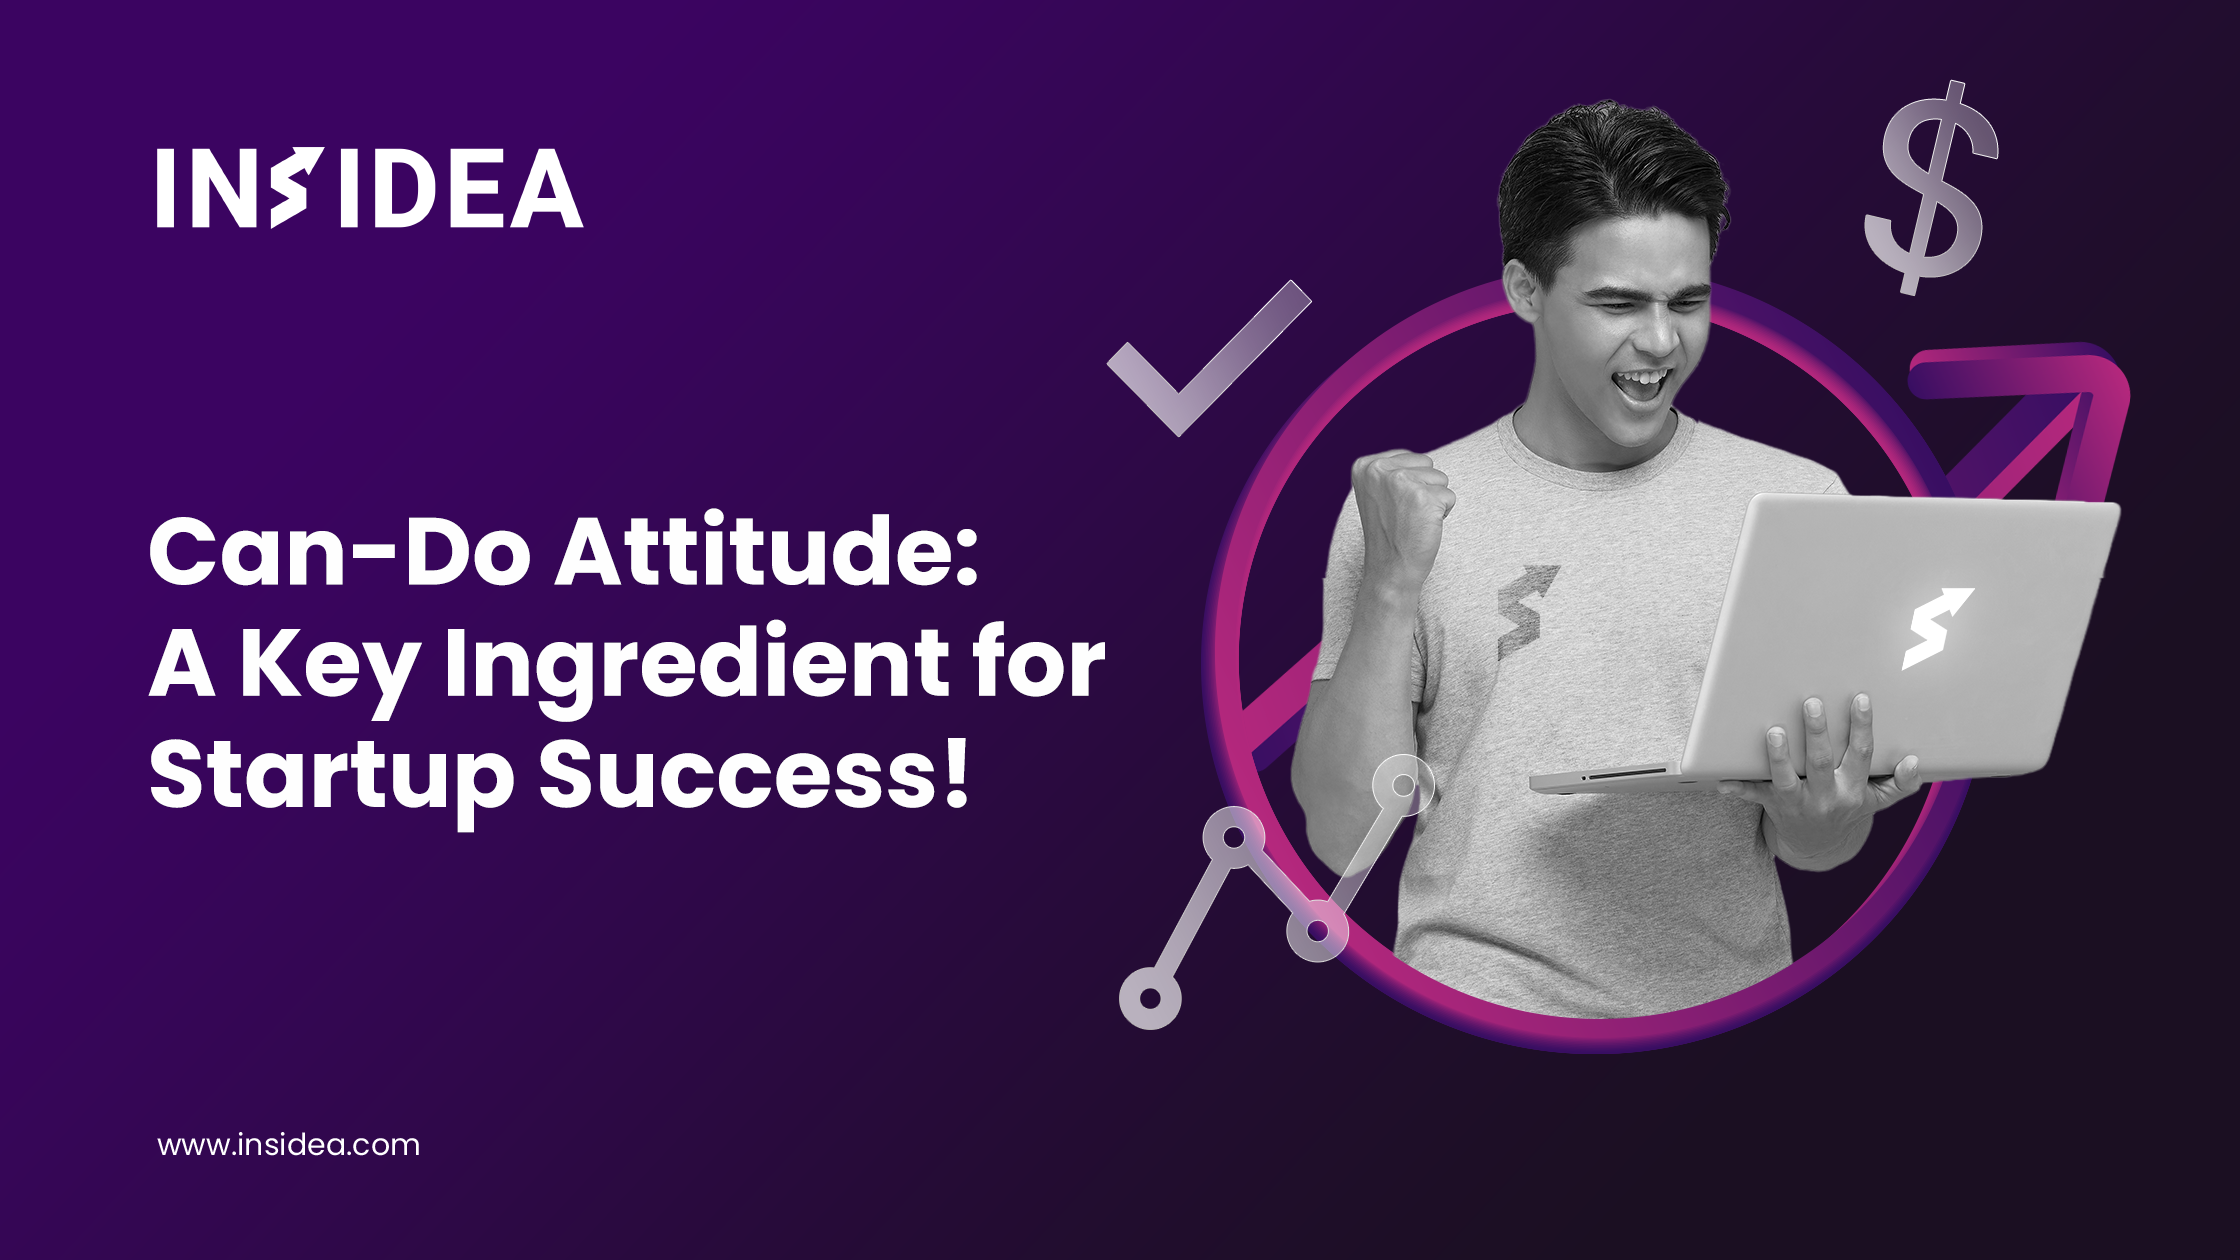 Can-Do Attitude: A Key Ingredient for Startup Success!